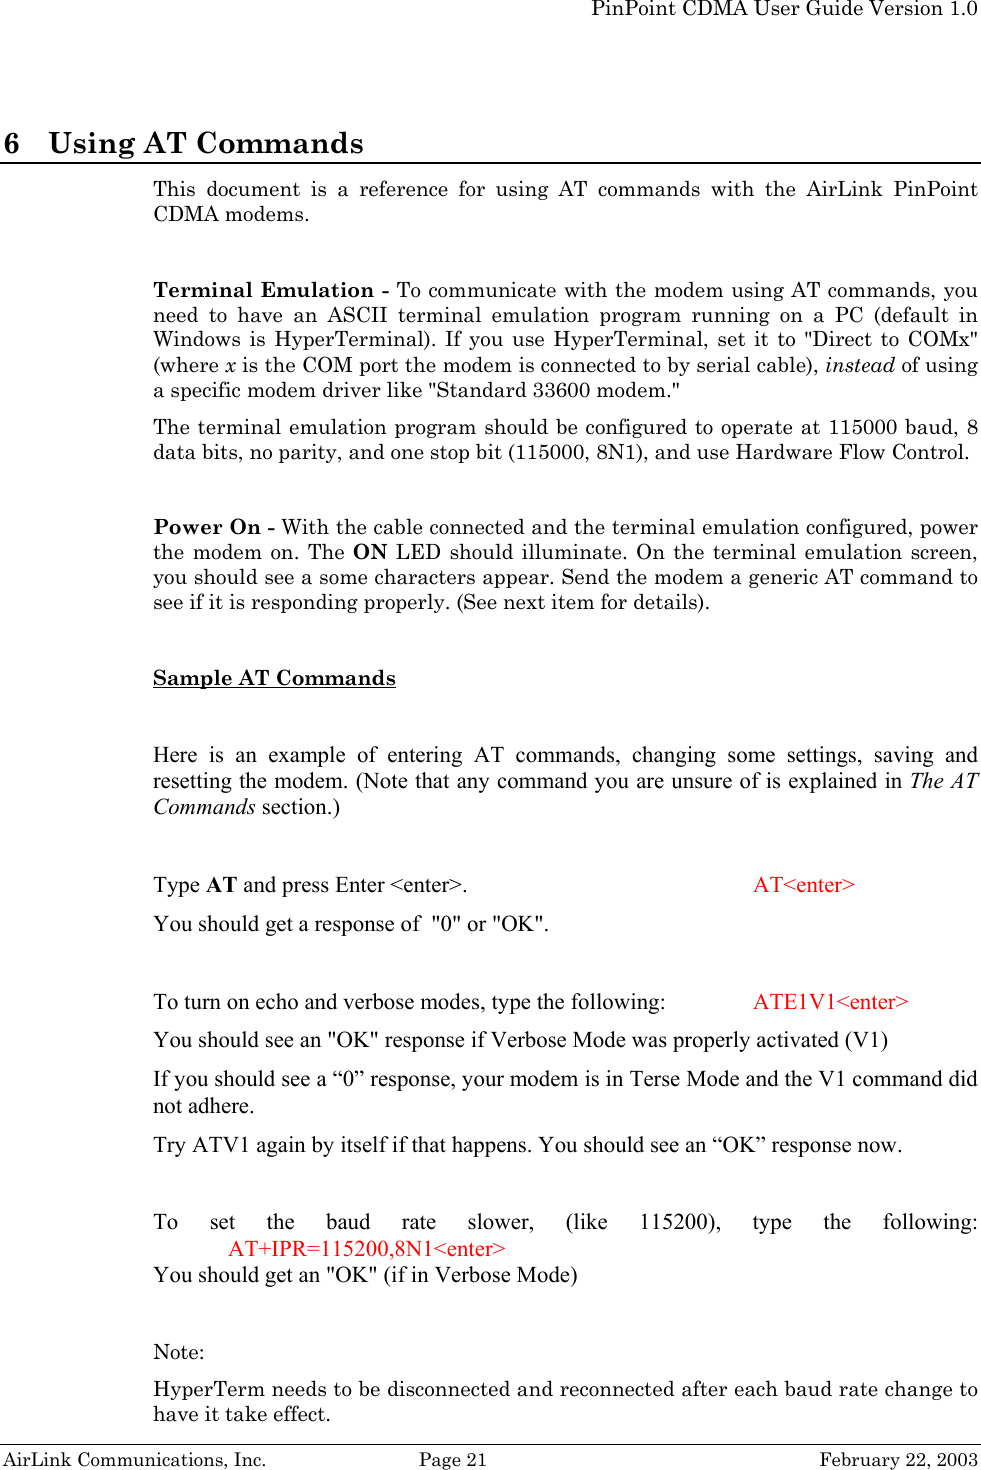   PinPoint CDMA User Guide Version 1.0   AirLink Communications, Inc.  Page 21  February 22, 2003 6 Using AT Commands This document is a reference for using AT commands with the AirLink PinPoint CDMA modems.   Terminal Emulation - To communicate with the modem using AT commands, you need to have an ASCII terminal emulation program running on a PC (default in Windows is HyperTerminal). If you use HyperTerminal, set it to &quot;Direct to COMx&quot; (where x is the COM port the modem is connected to by serial cable), instead of using a specific modem driver like &quot;Standard 33600 modem.&quot; The terminal emulation program should be configured to operate at 115000 baud, 8 data bits, no parity, and one stop bit (115000, 8N1), and use Hardware Flow Control.  Power On - With the cable connected and the terminal emulation configured, power the modem on. The ON  LED should illuminate. On the terminal emulation screen, you should see a some characters appear. Send the modem a generic AT command to see if it is responding properly. (See next item for details).  Sample AT Commands   Here is an example of entering AT commands, changing some settings, saving and resetting the modem. (Note that any command you are unsure of is explained in The AT Commands section.)  Type AT and press Enter &lt;enter&gt;.         AT&lt;enter&gt; You should get a response of  &quot;0&quot; or &quot;OK&quot;.  To turn on echo and verbose modes, type the following:     ATE1V1&lt;enter&gt; You should see an &quot;OK&quot; response if Verbose Mode was properly activated (V1) If you should see a “0” response, your modem is in Terse Mode and the V1 command did not adhere. Try ATV1 again by itself if that happens. You should see an “OK” response now.  To set the baud rate slower, (like 115200), type the following: AT+IPR=115200,8N1&lt;enter&gt; You should get an &quot;OK&quot; (if in Verbose Mode)  Note:  HyperTerm needs to be disconnected and reconnected after each baud rate change to have it take effect. 